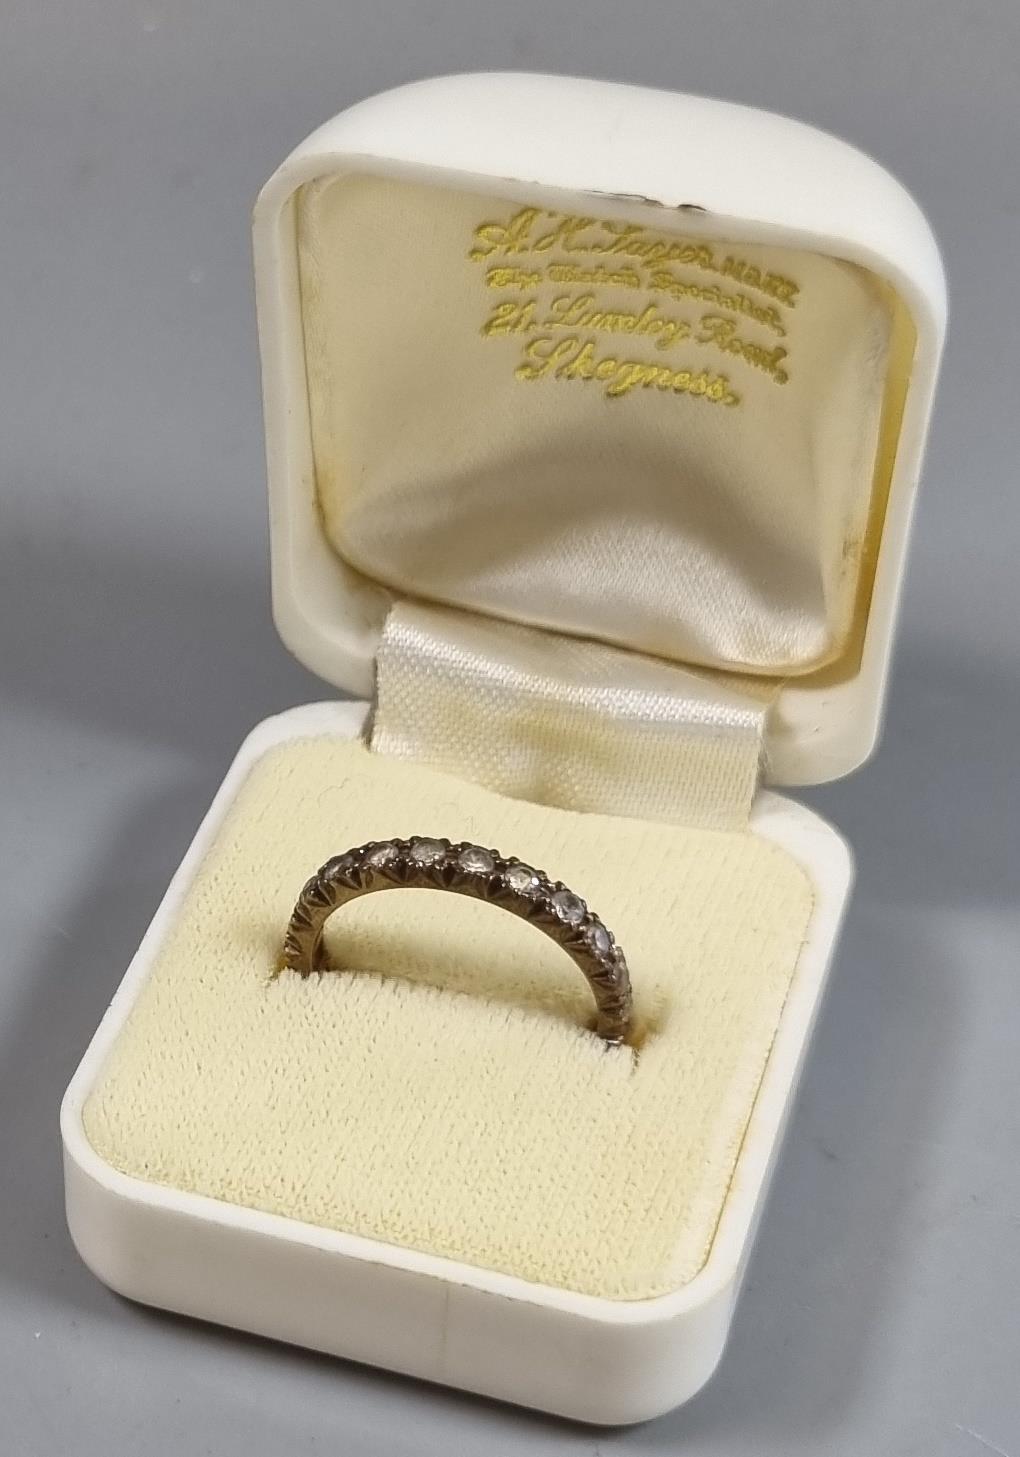 9ct gold full eternity style ring with white paste stones. 1.8g approx. Size M1/2. (B.P. 21% + VAT) - Image 4 of 4